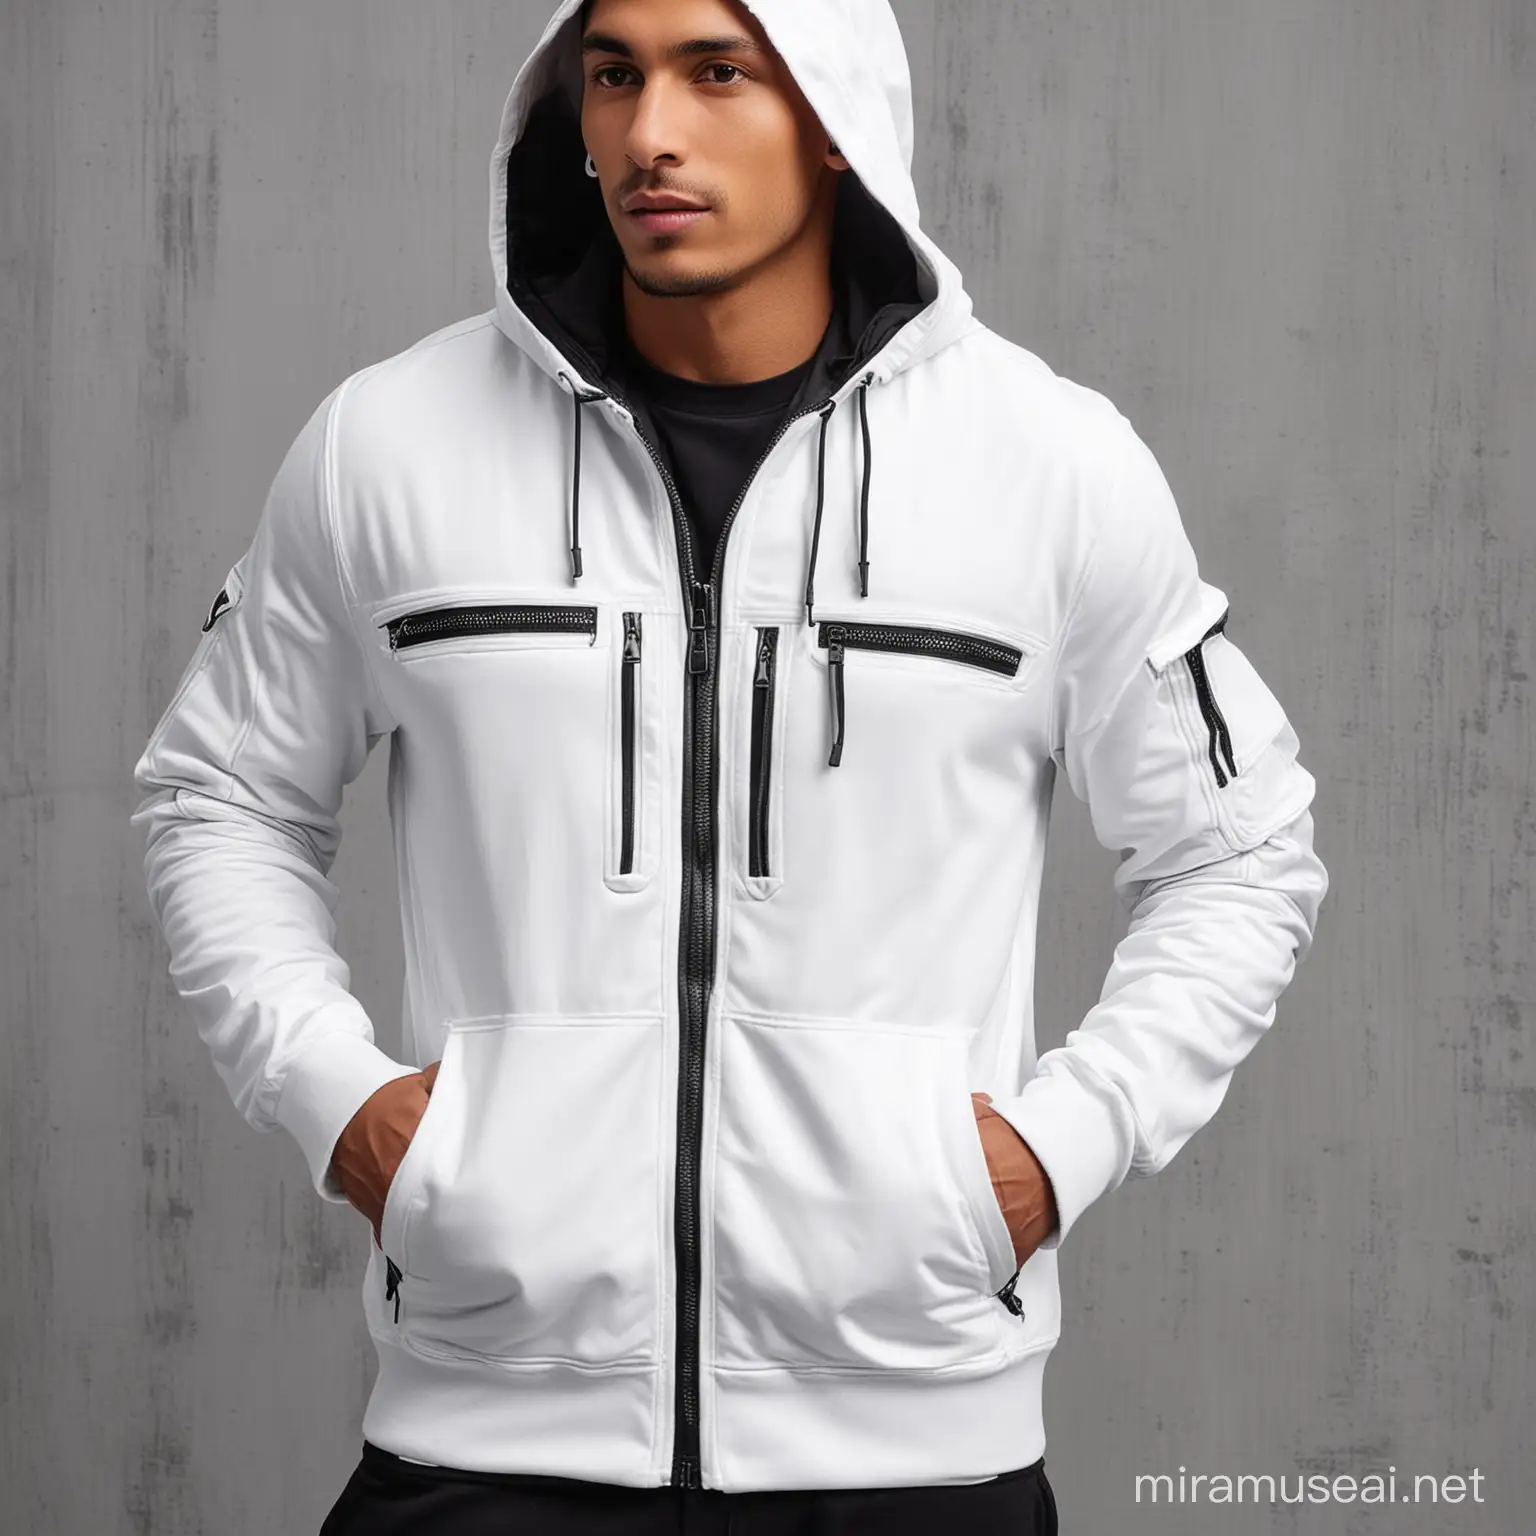 Urban Style Mens White Active Jacket with Hood and Multiple Pockets